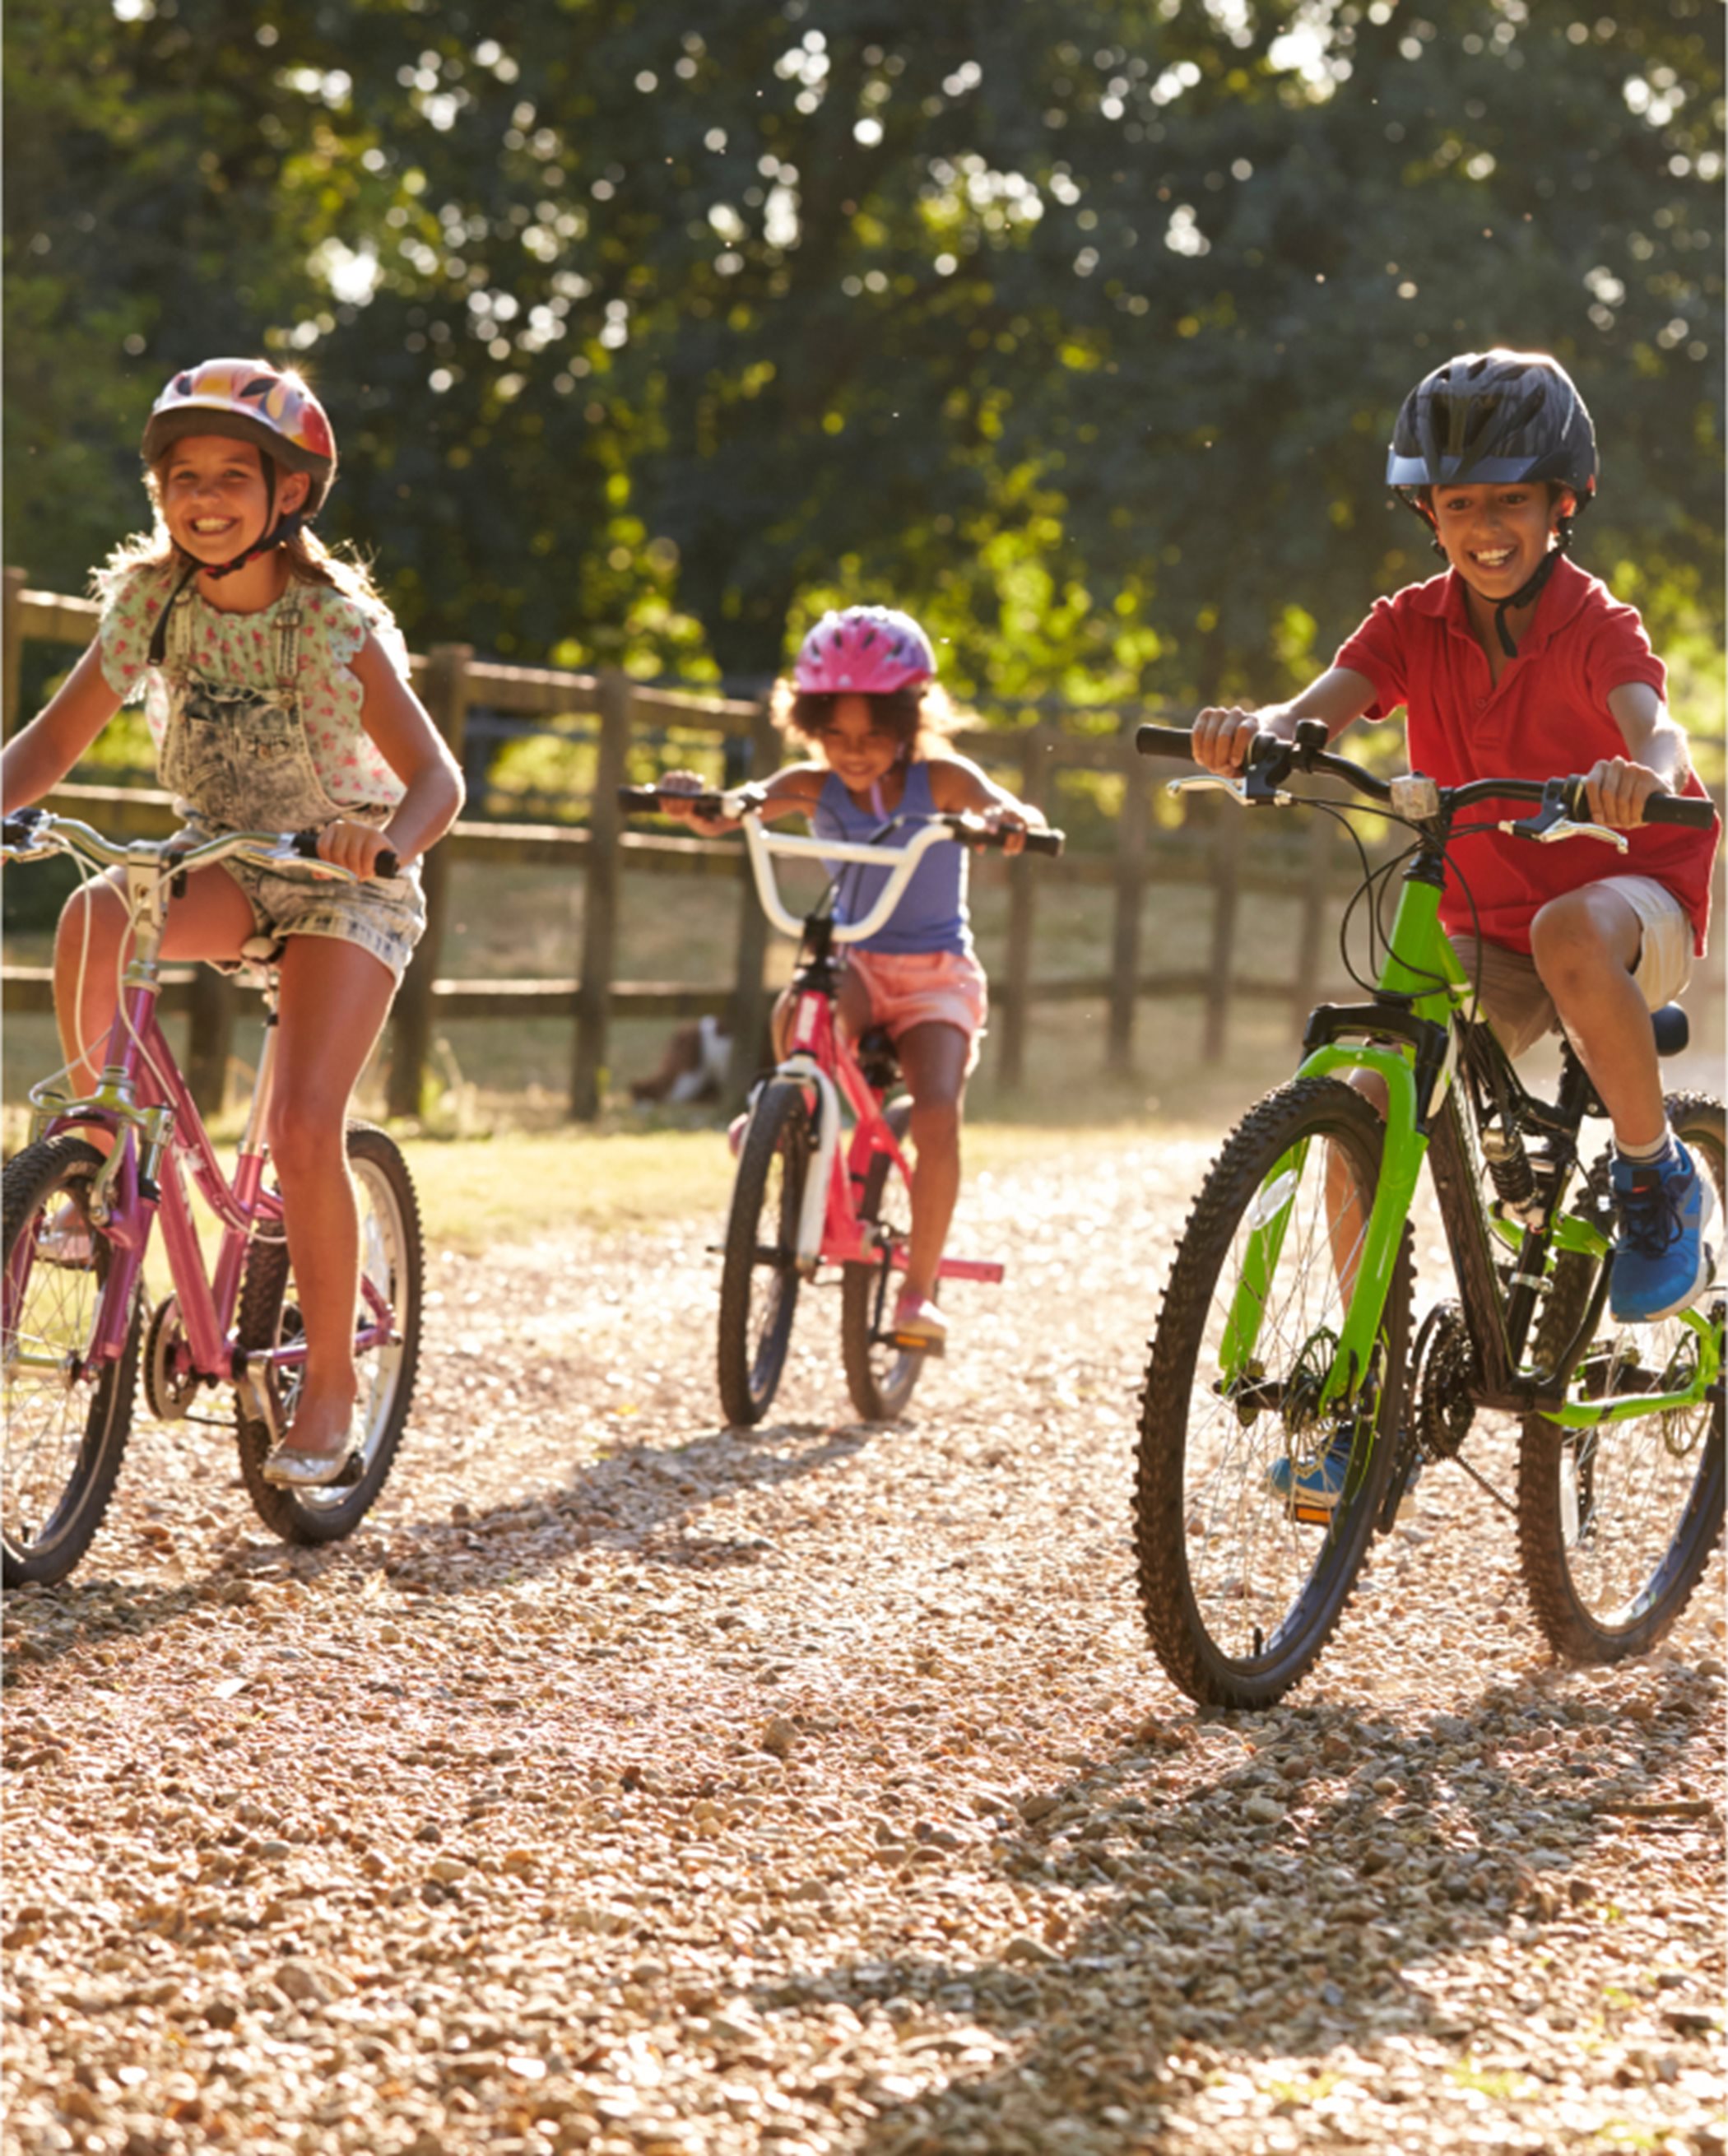 A group of kids riding bikes